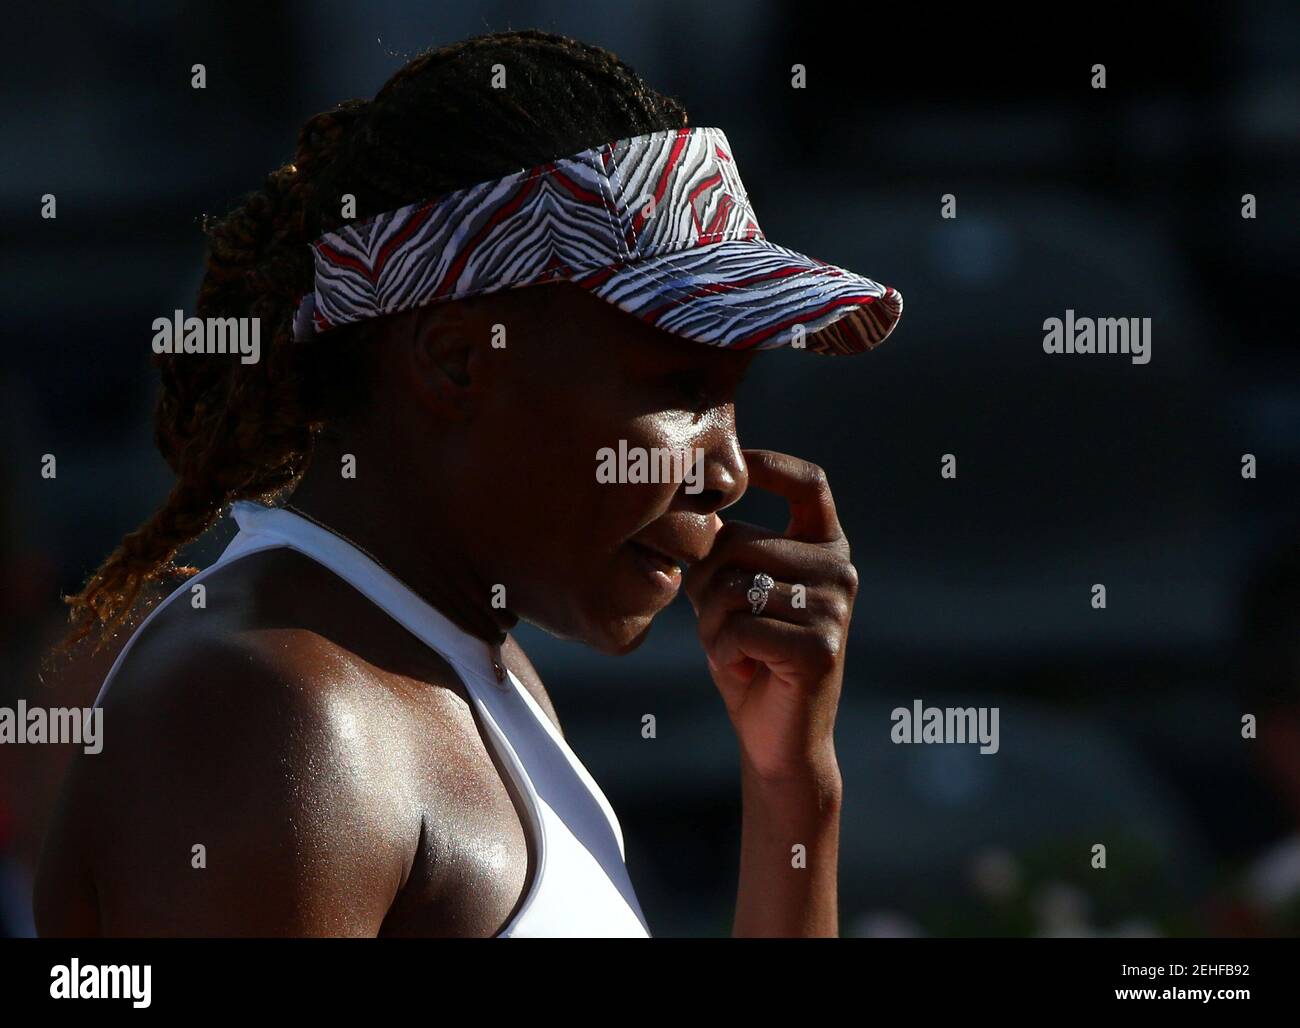 Tennis - WTA Premier 5 - Italian Open - Foro Italico, Rome, Italy - May 16, 2018   Venus Williams of the U.S. during her second round match against Russia's Elena Vesnina   REUTERS/Alessandro Bianchi Stock Photo